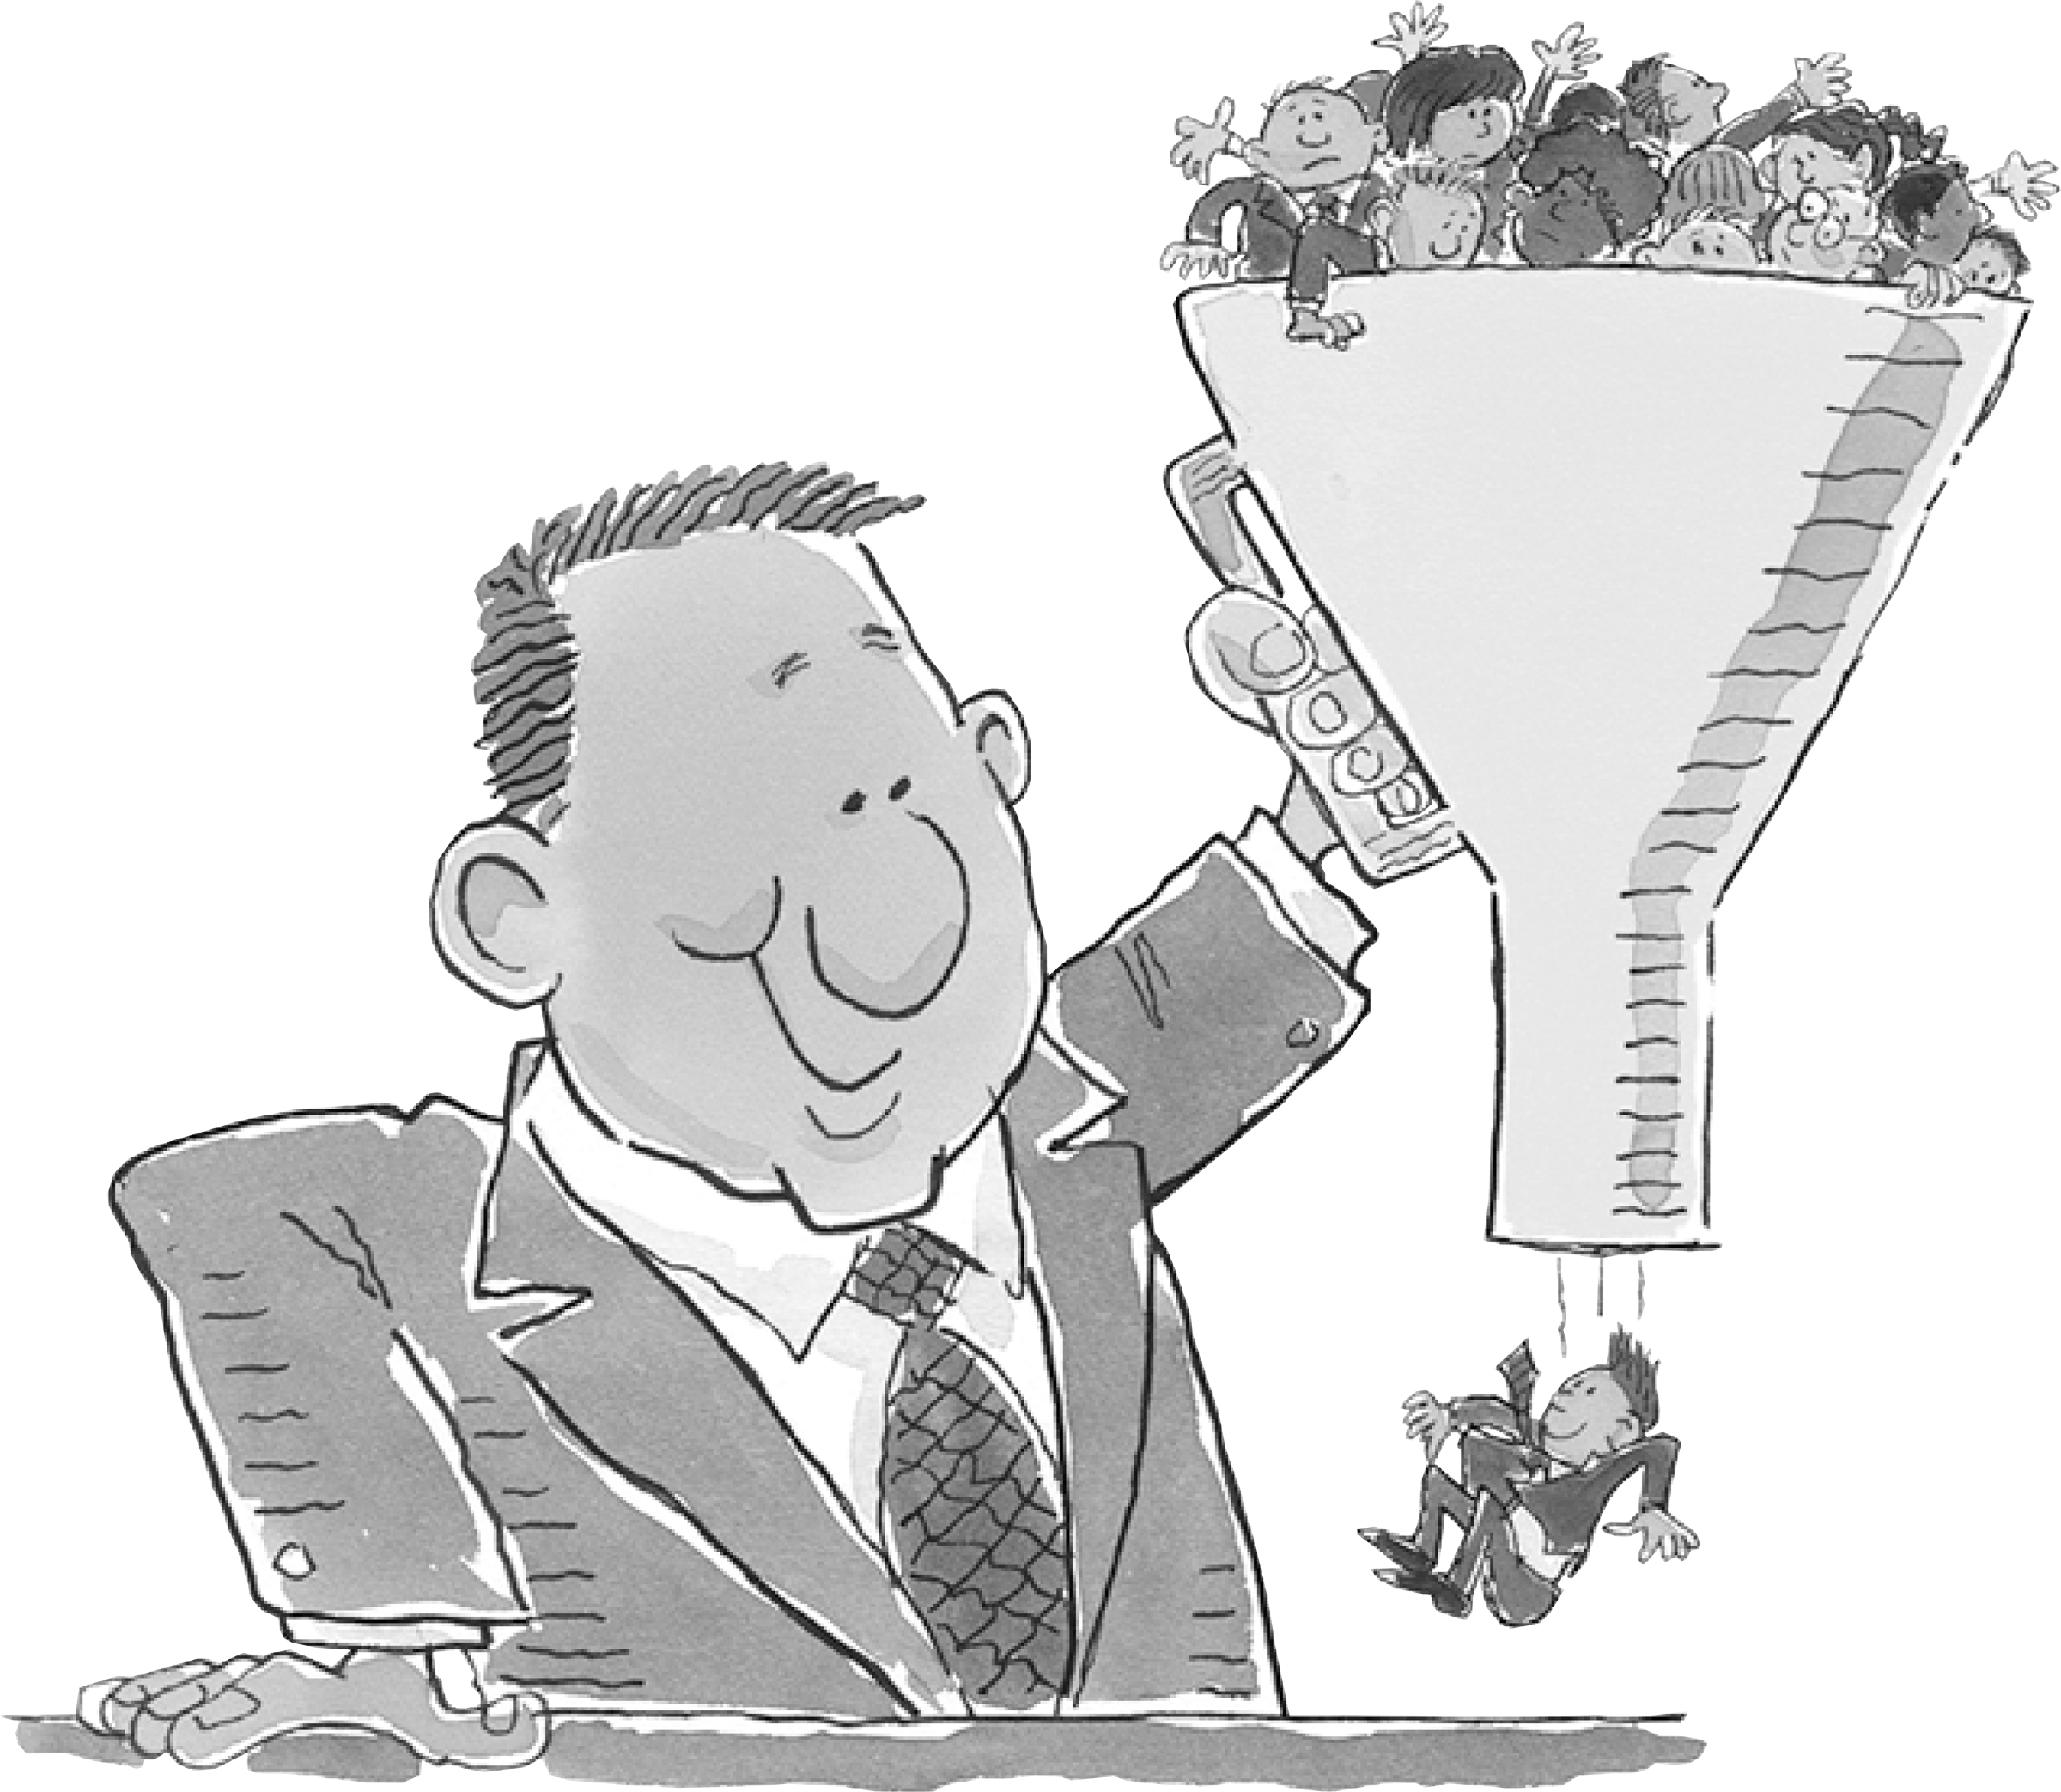 A Cartoon Of A Man Holding A Funnel With Small Children